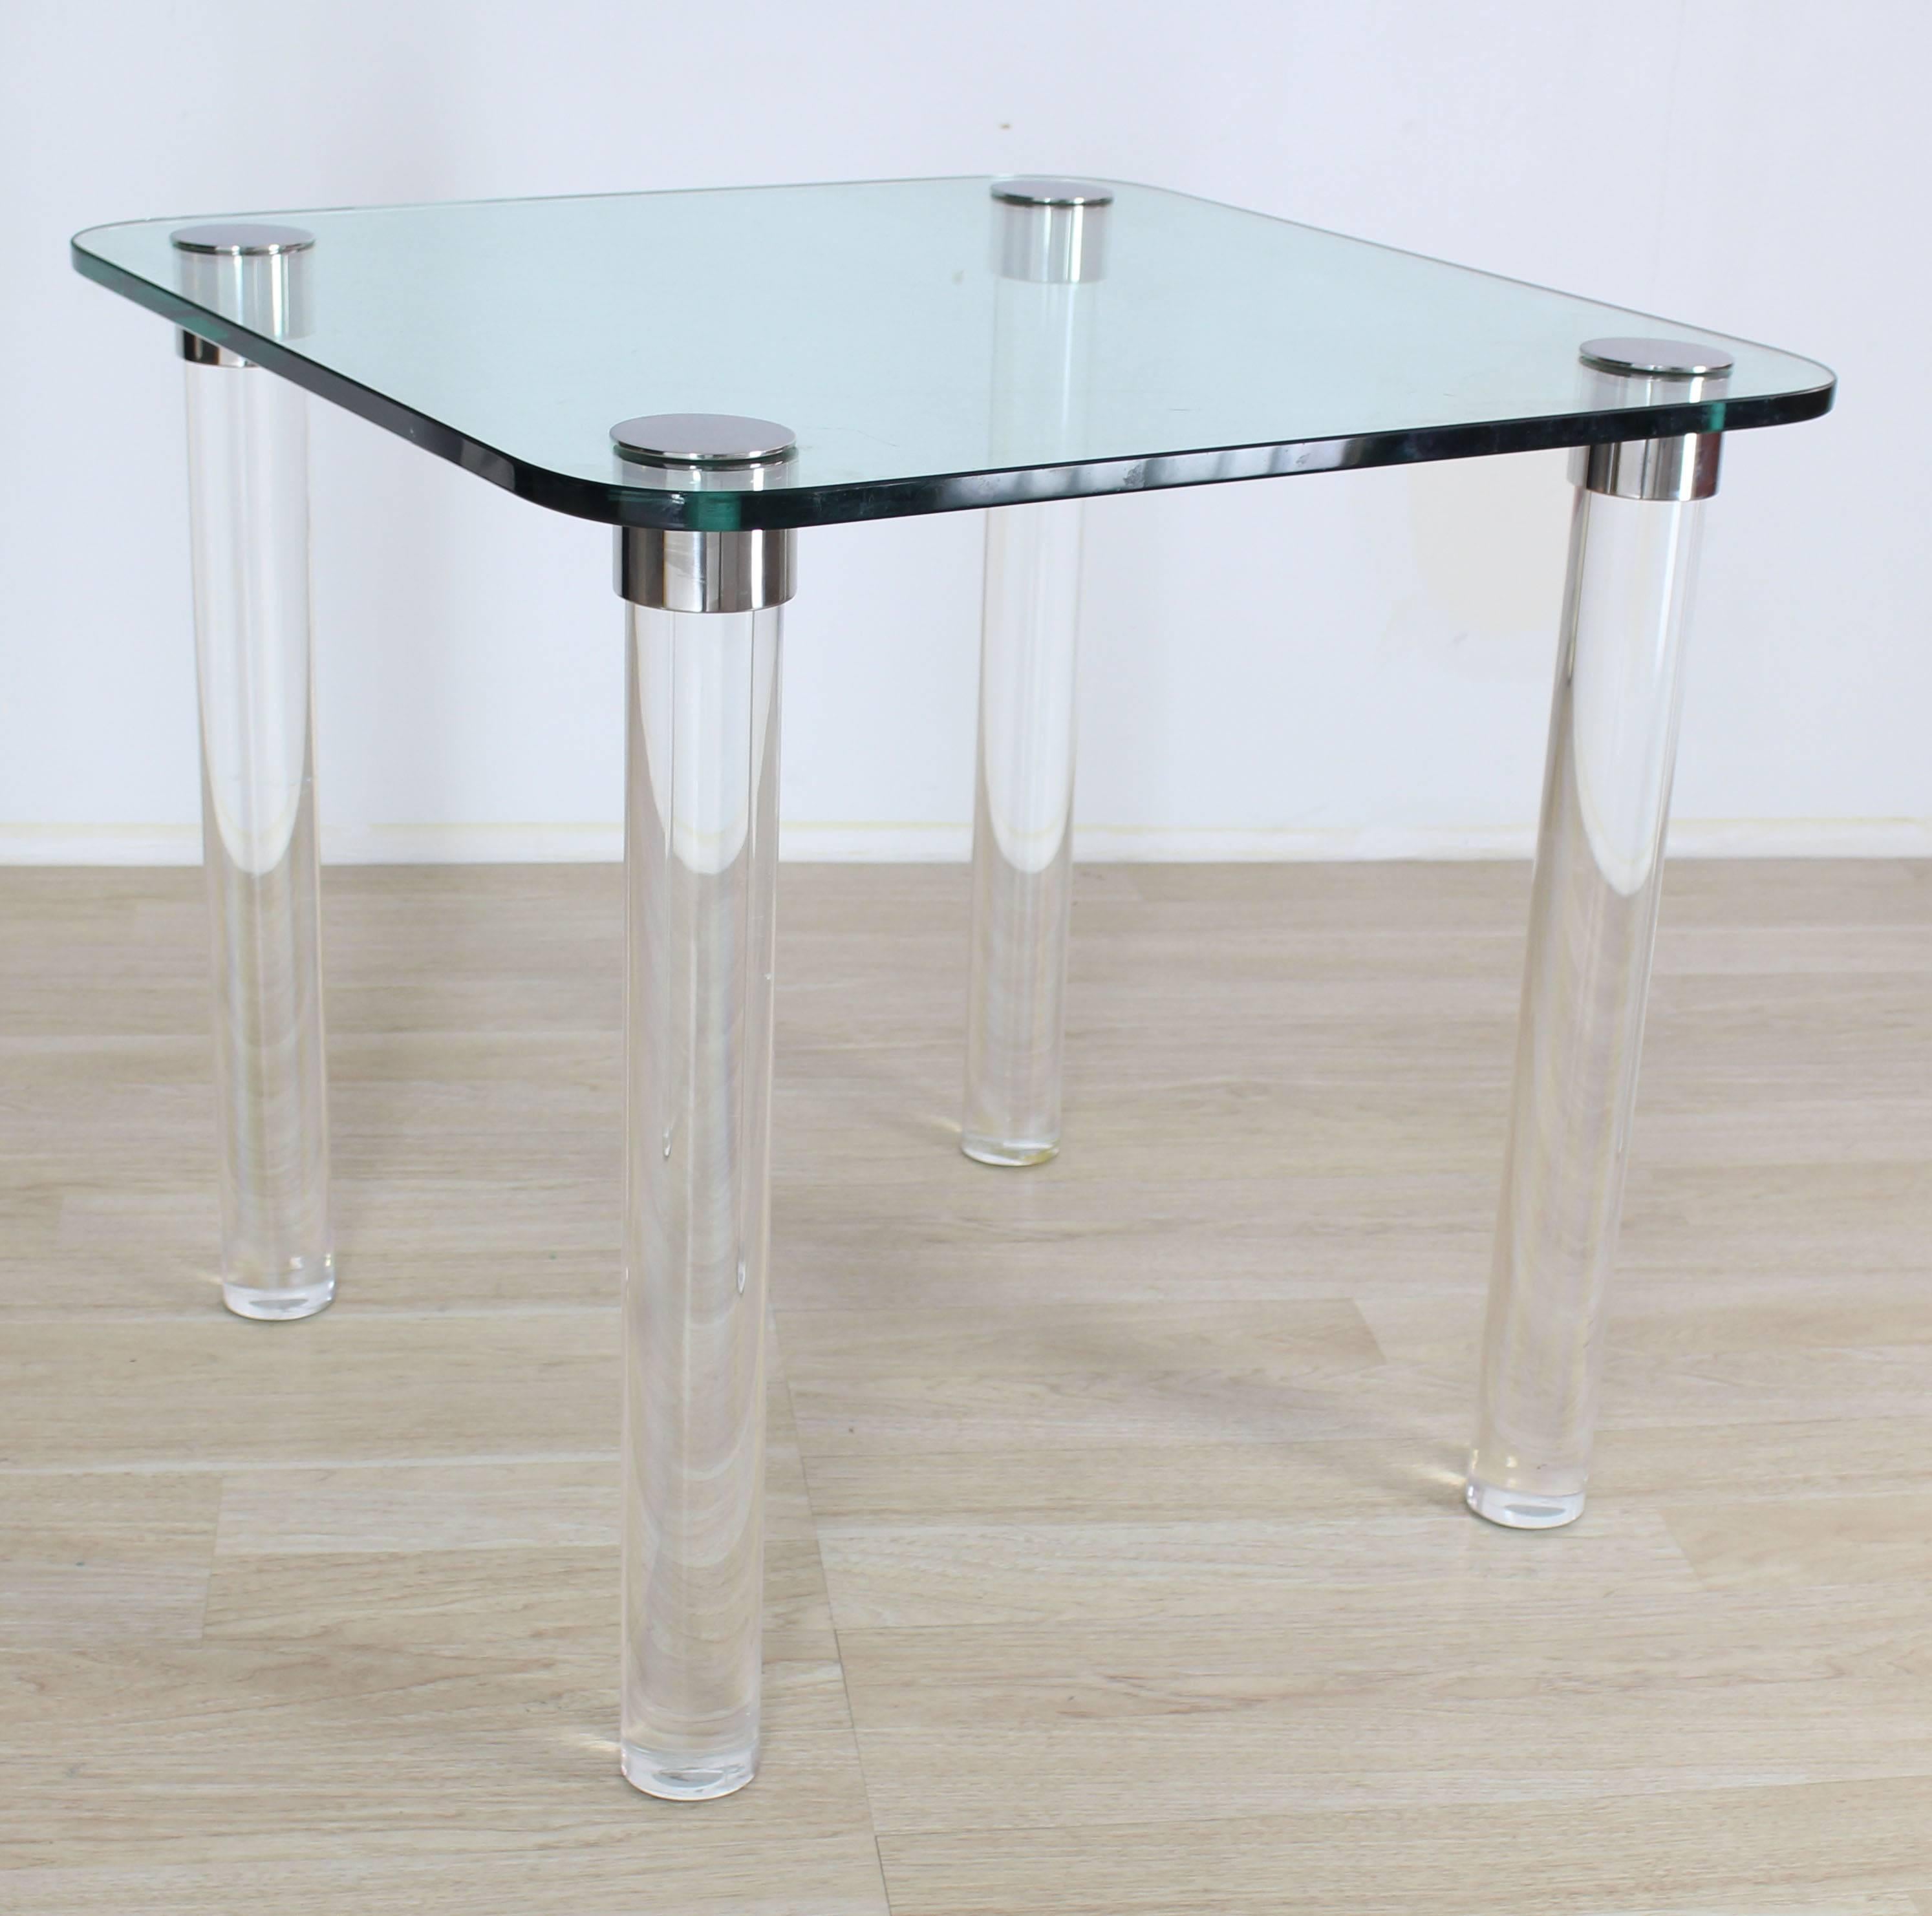 Mid-Century Modern thick Lucite top dinette or game table with rounded corner. Thick heavy Lucite legs. The legs are removable and table can be disassembled for stage or transportation.